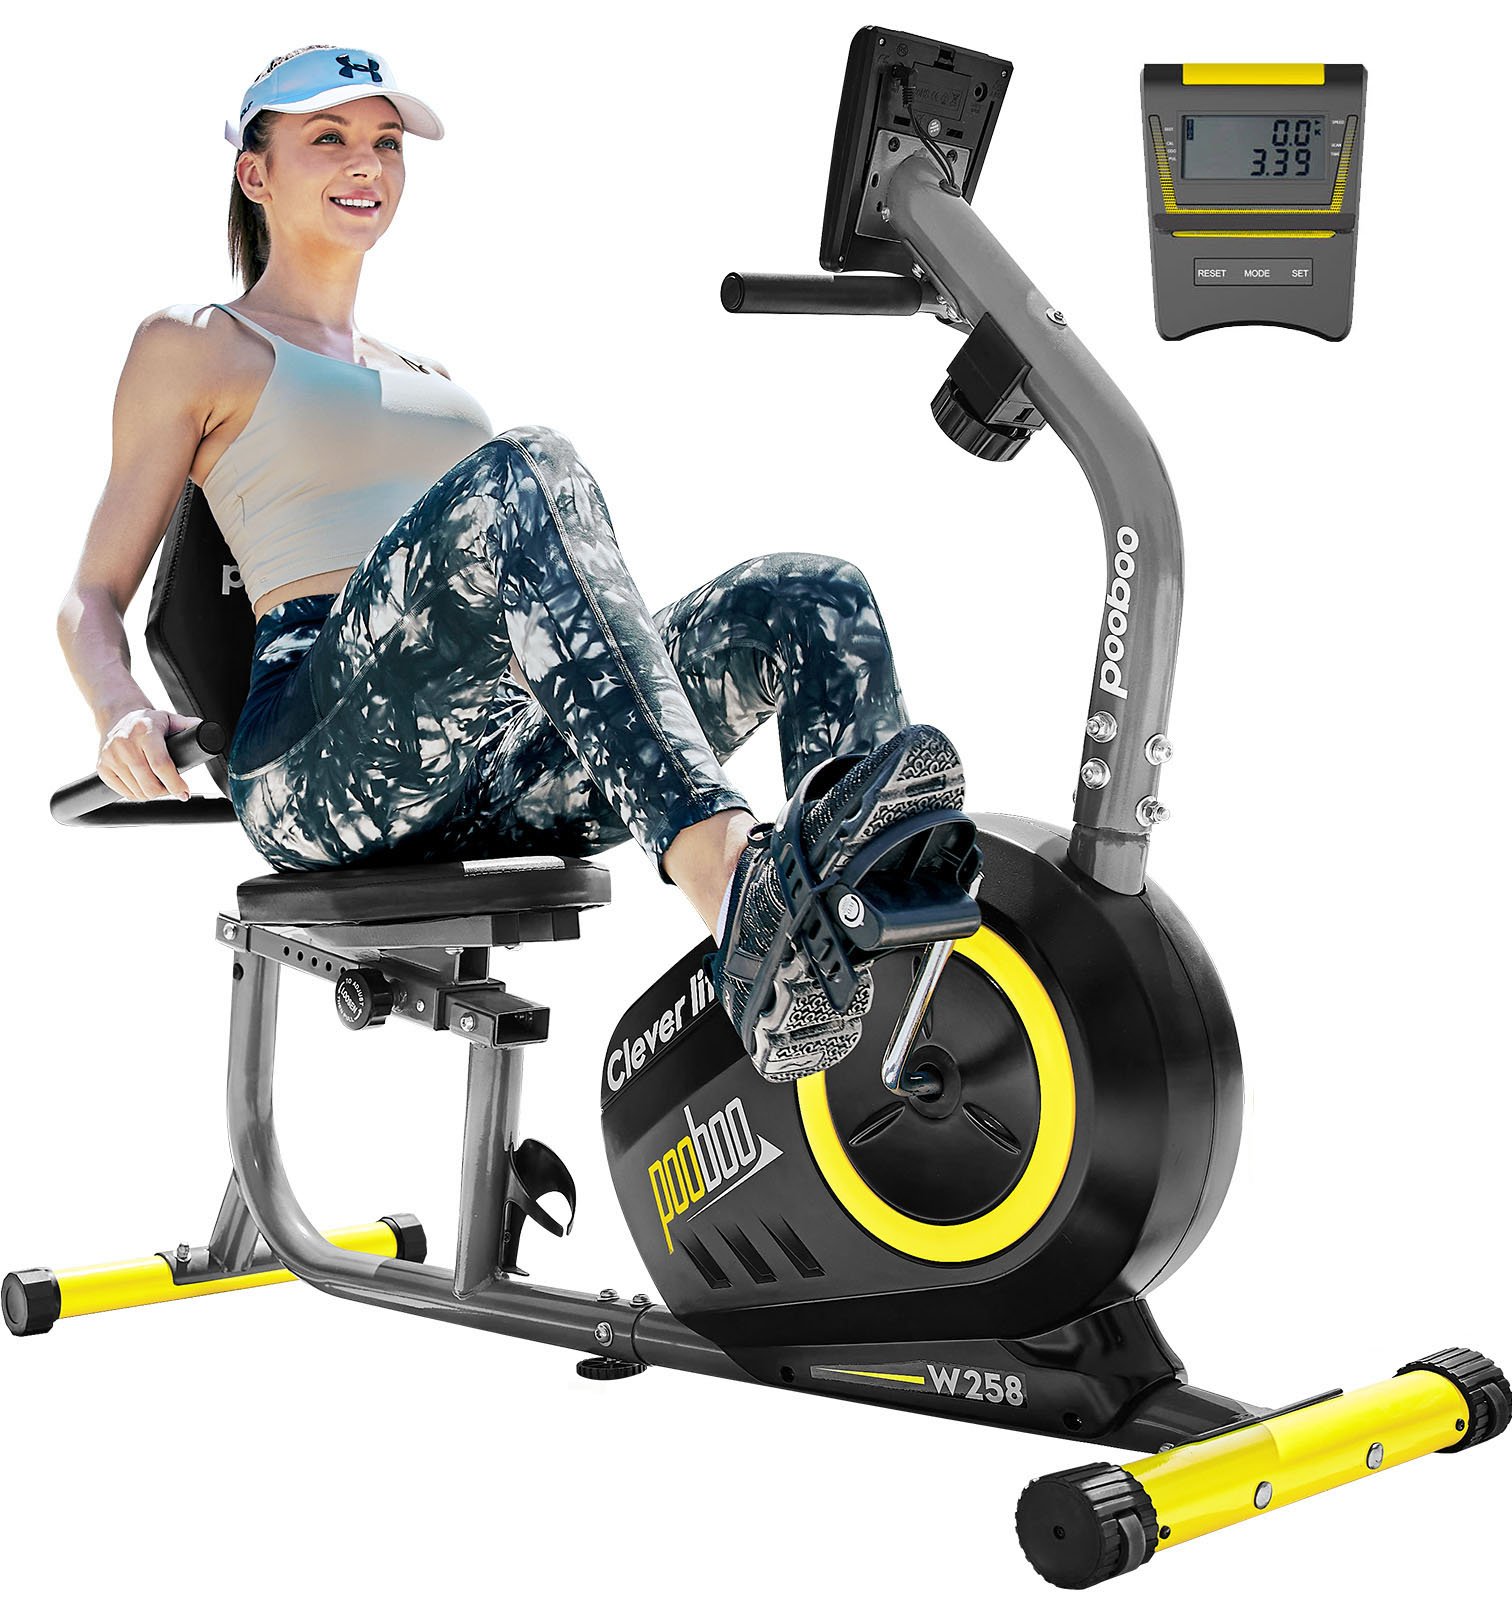 Pooboo Recumbent Exercise Bikes Sit Down Stationary Bicycle Magnetic Resistance Indoor Cycling Bike 380lb Yellow - image 1 of 18